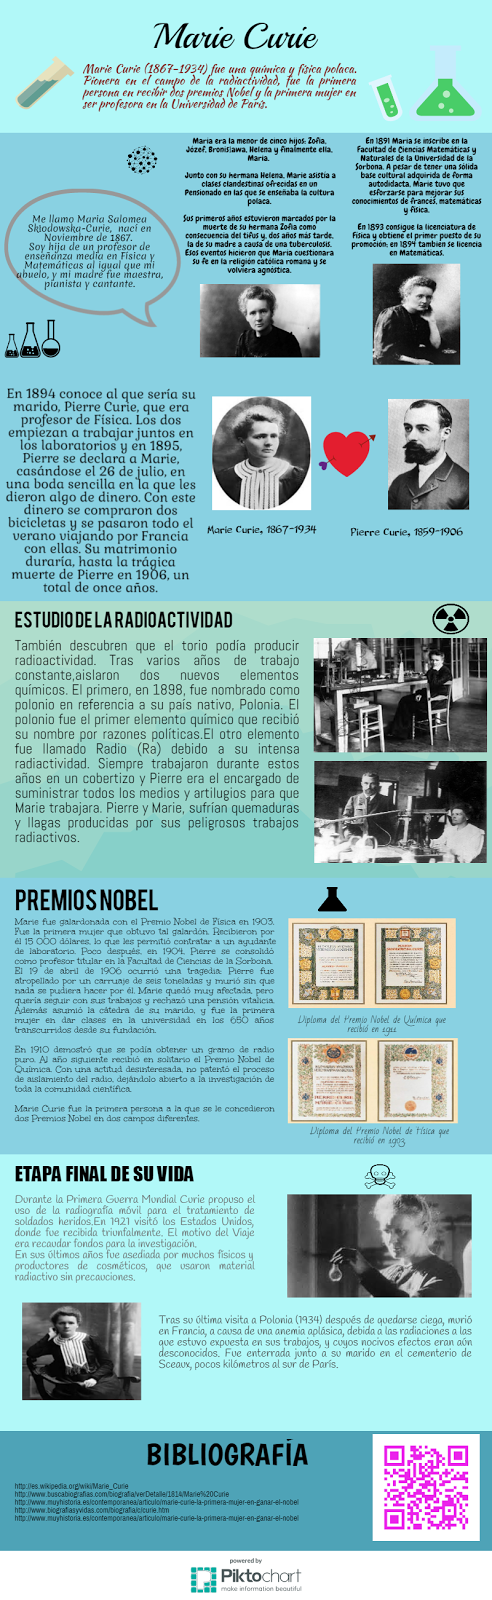 Marie Curie, infografia, infographic, madamme Curie, 